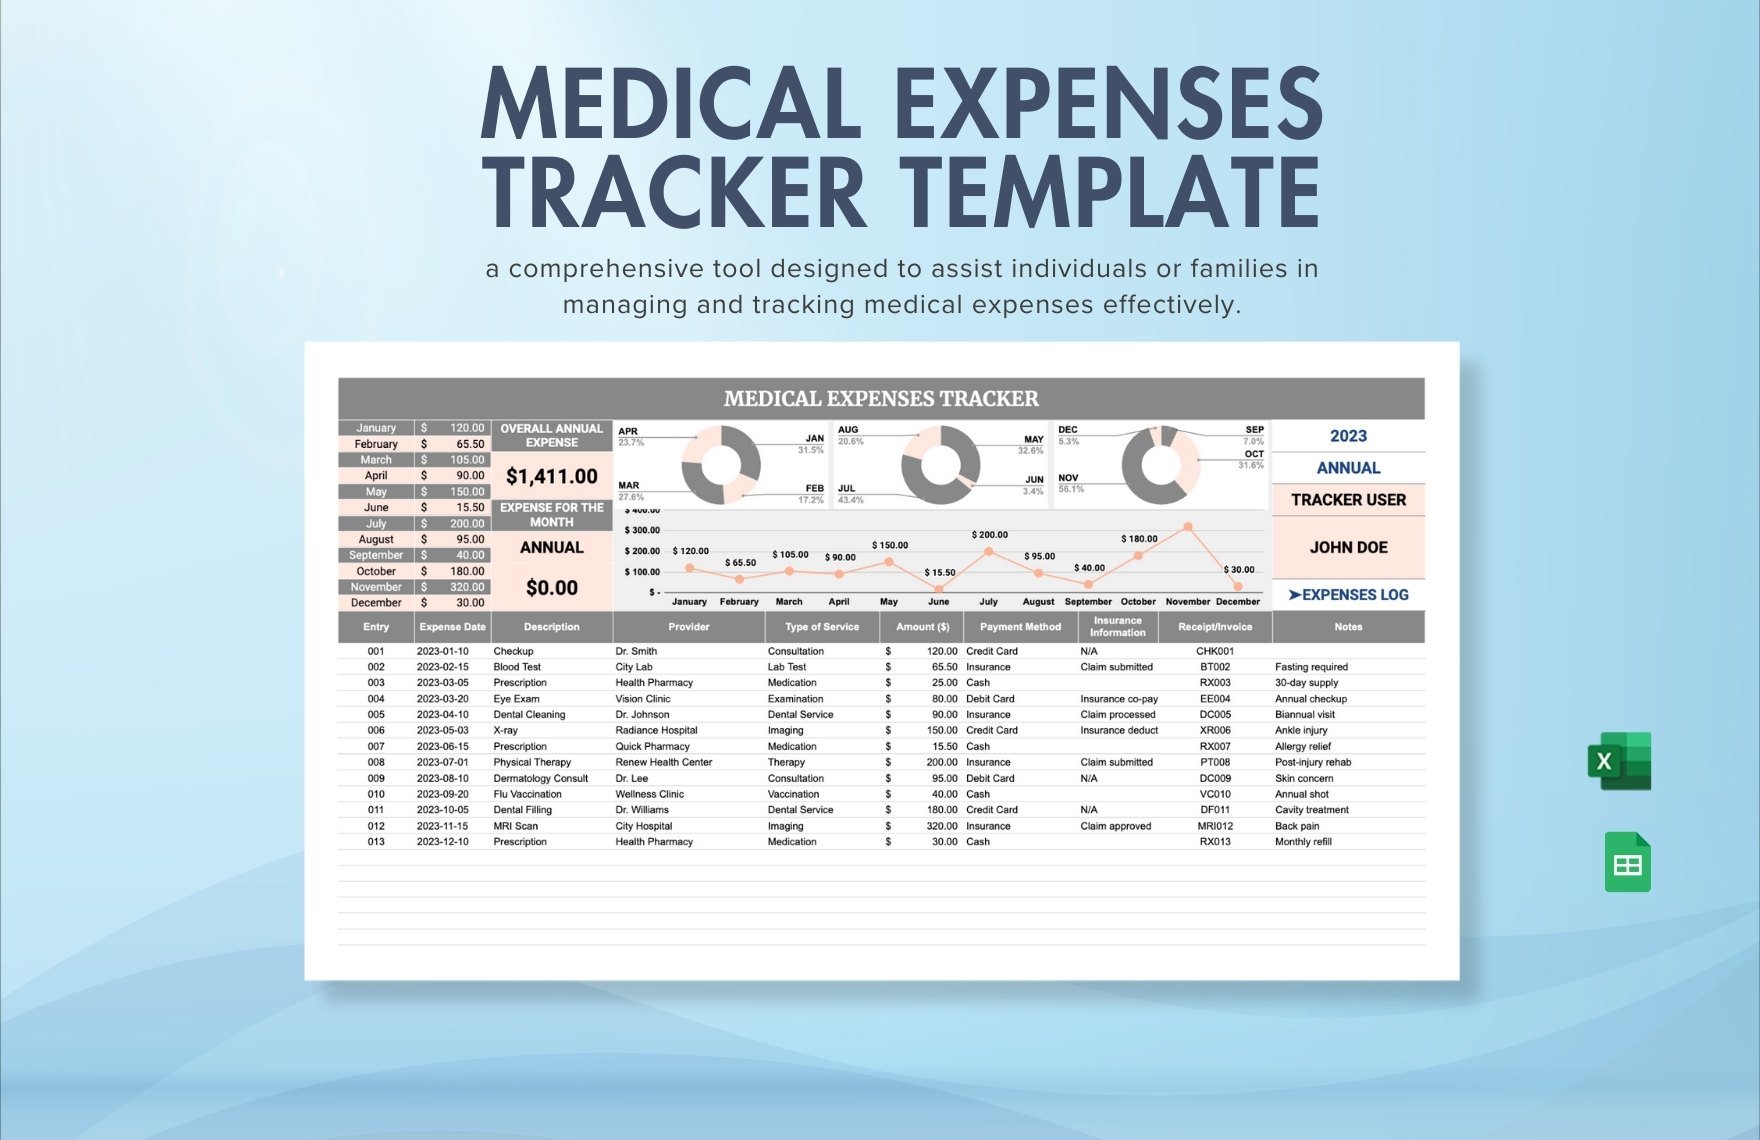 Medical Expenses Tracker Template in Excel, Google Sheets